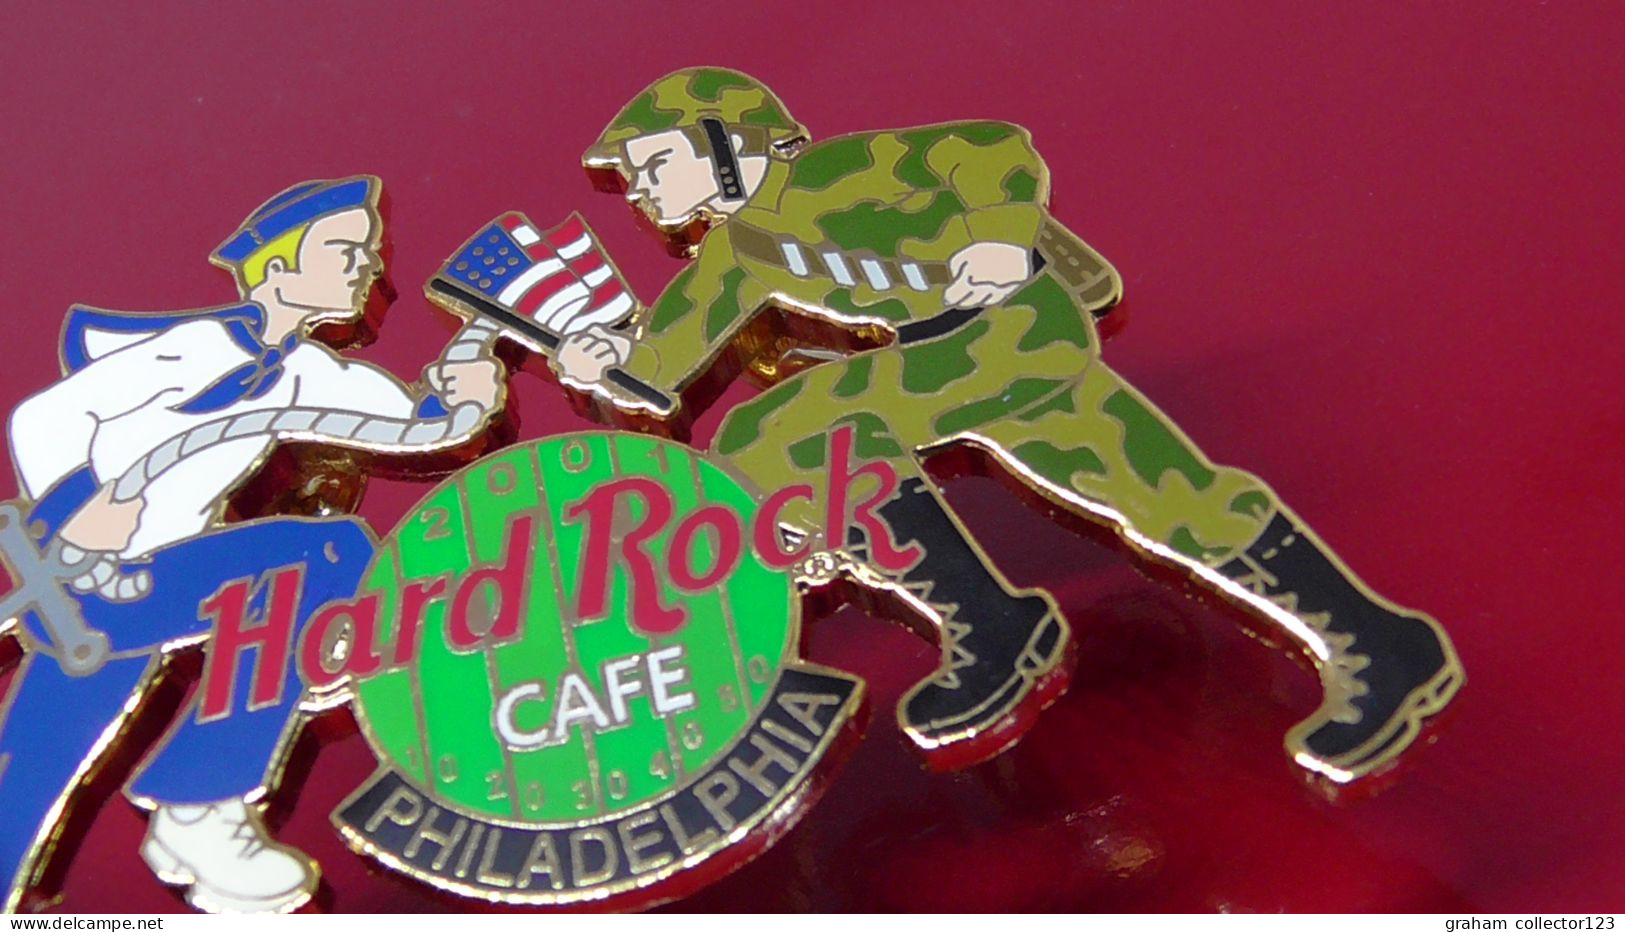 Hard Rock Cafe Enamel Pin Badge 2001 Philadelphia USA Armed Forces Naval Navy Soldier Army Limited Edition 500